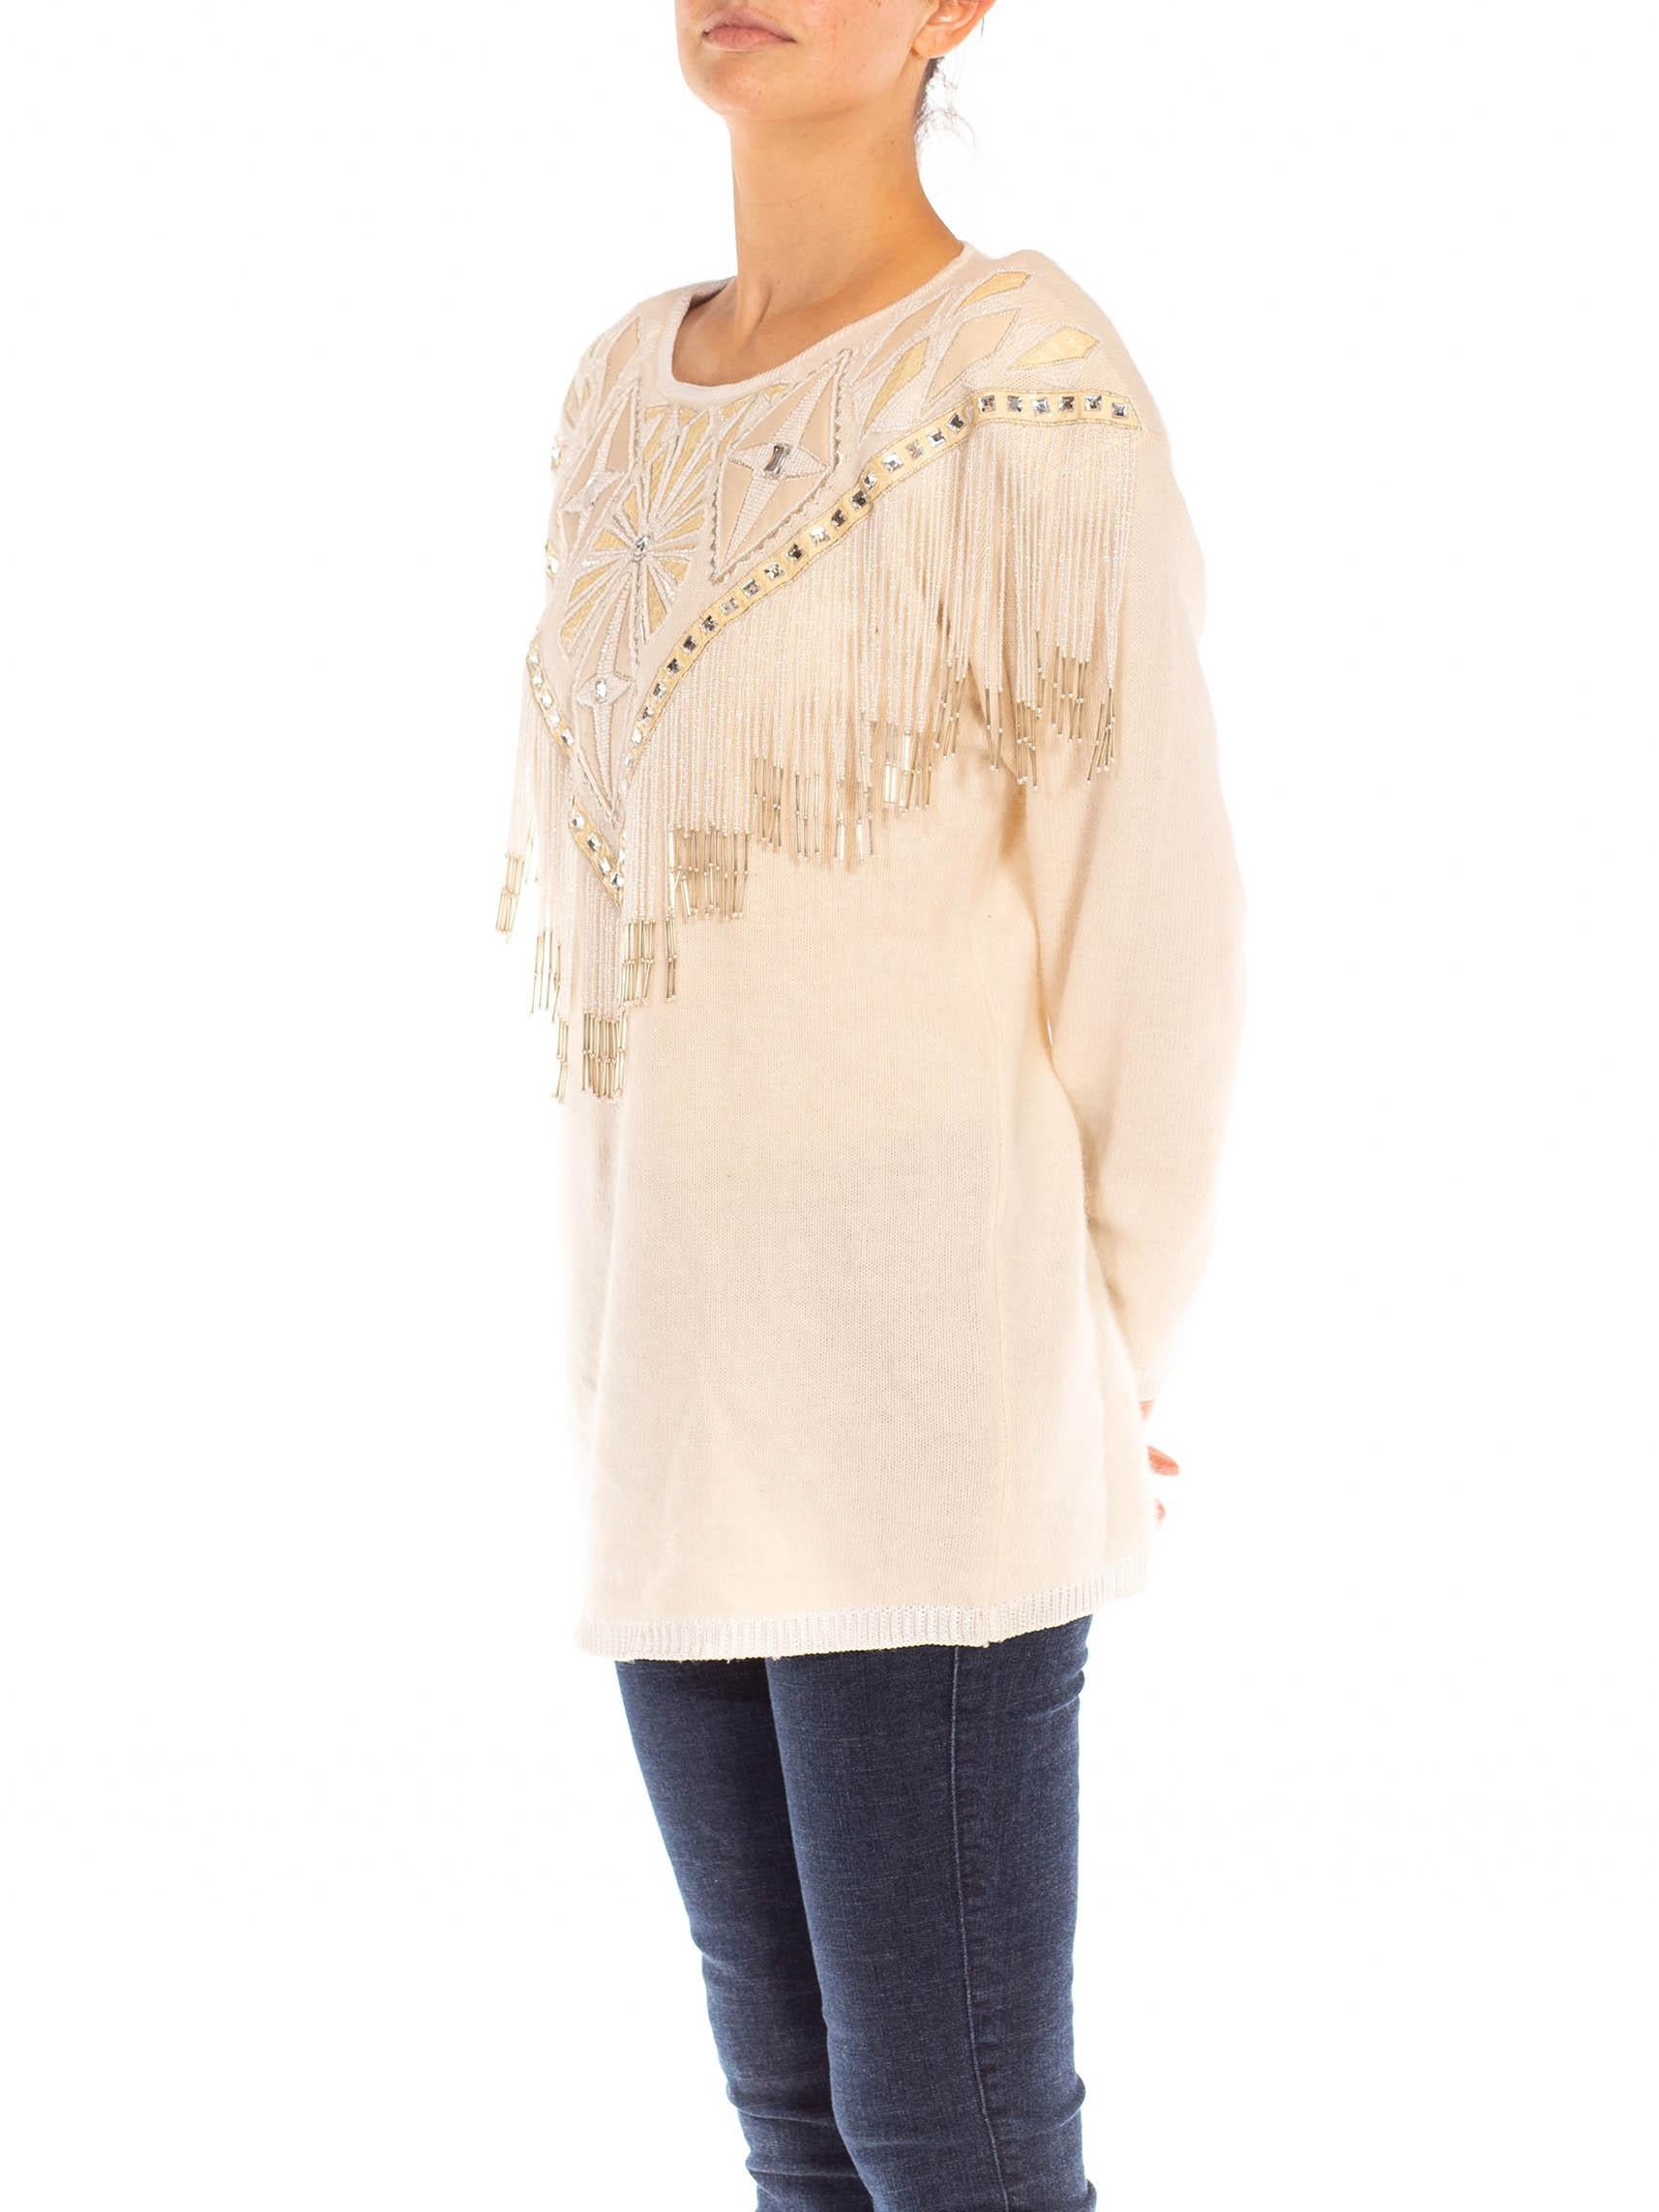 1980S Ivory & Tan Angora Lamb Wool Sweater With Western Style Leather Beaded Appliqué